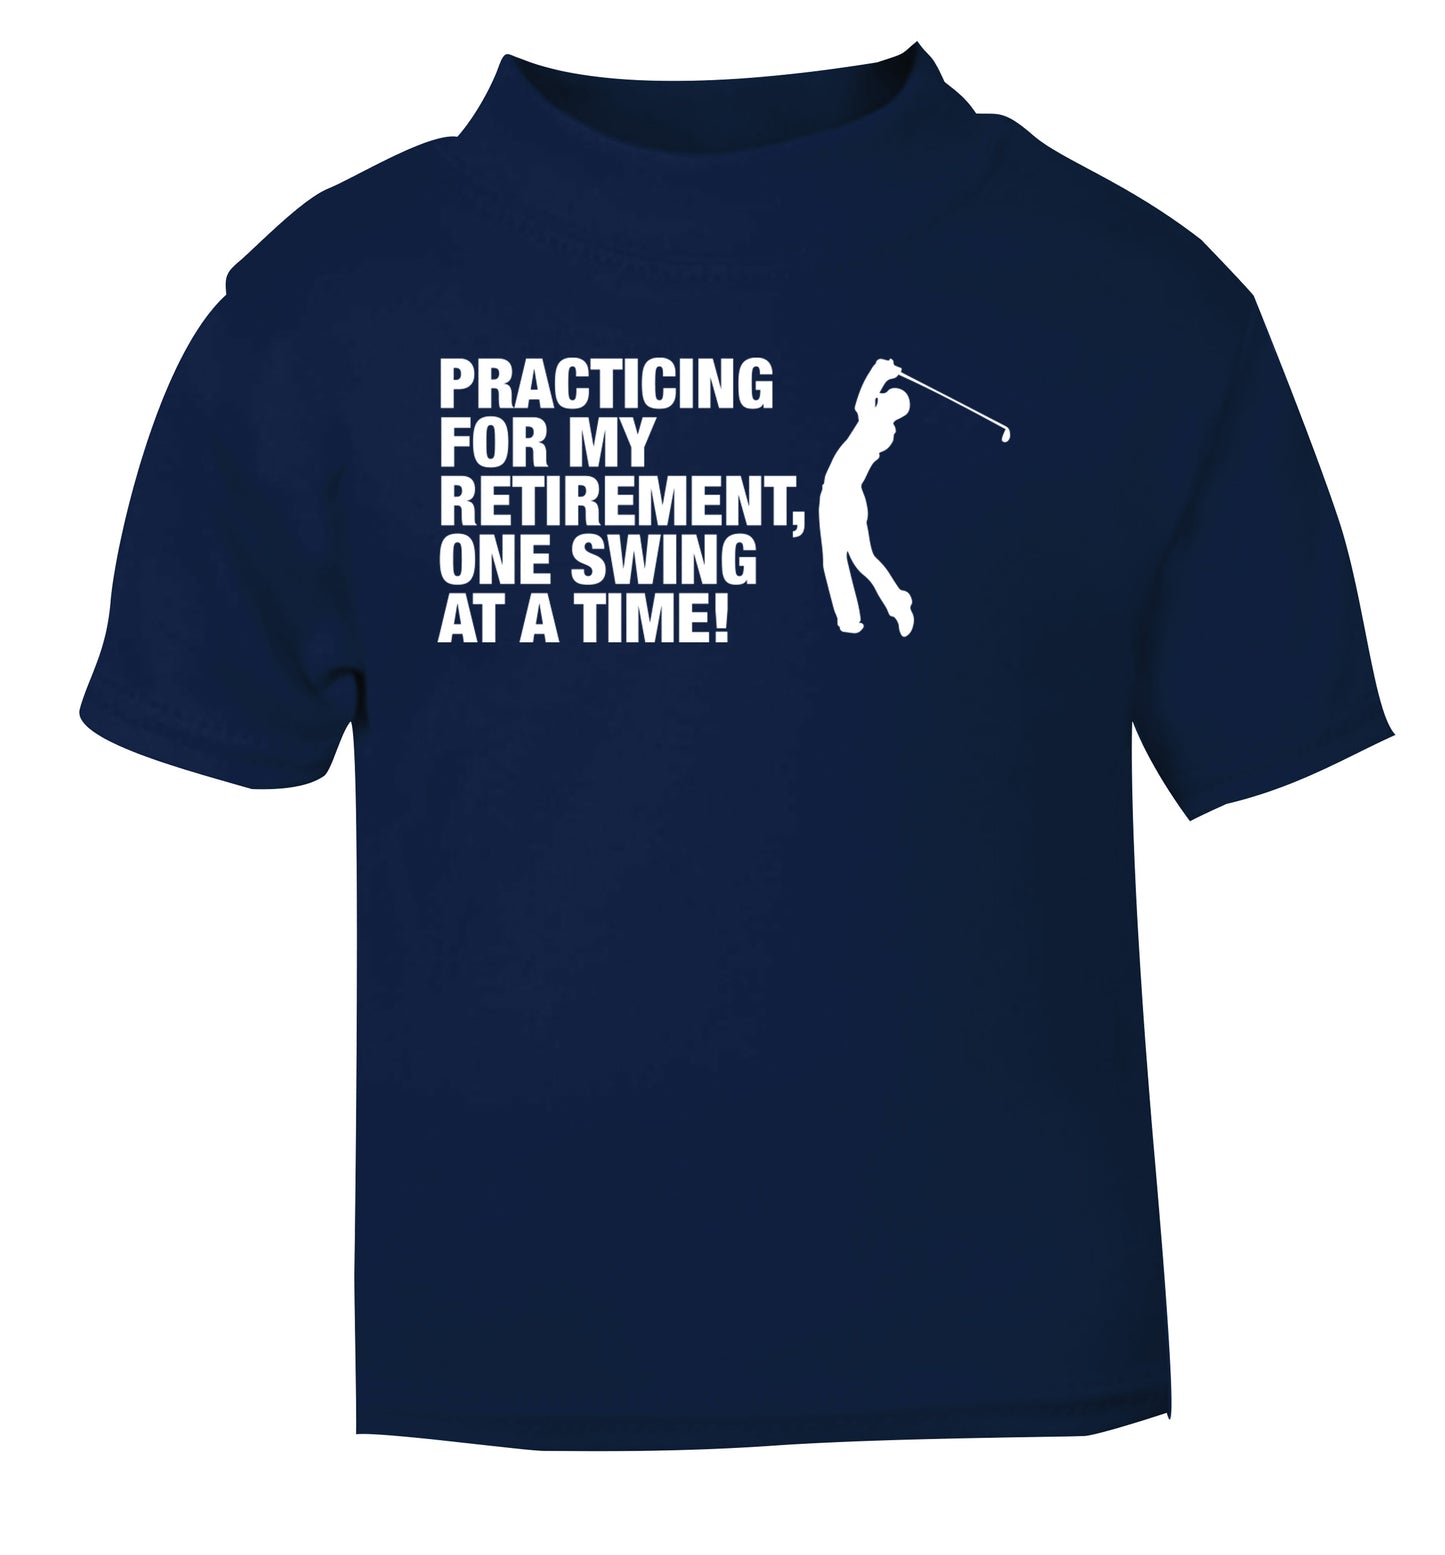 Practicing for my retirement one swing at a time navy Baby Toddler Tshirt 2 Years